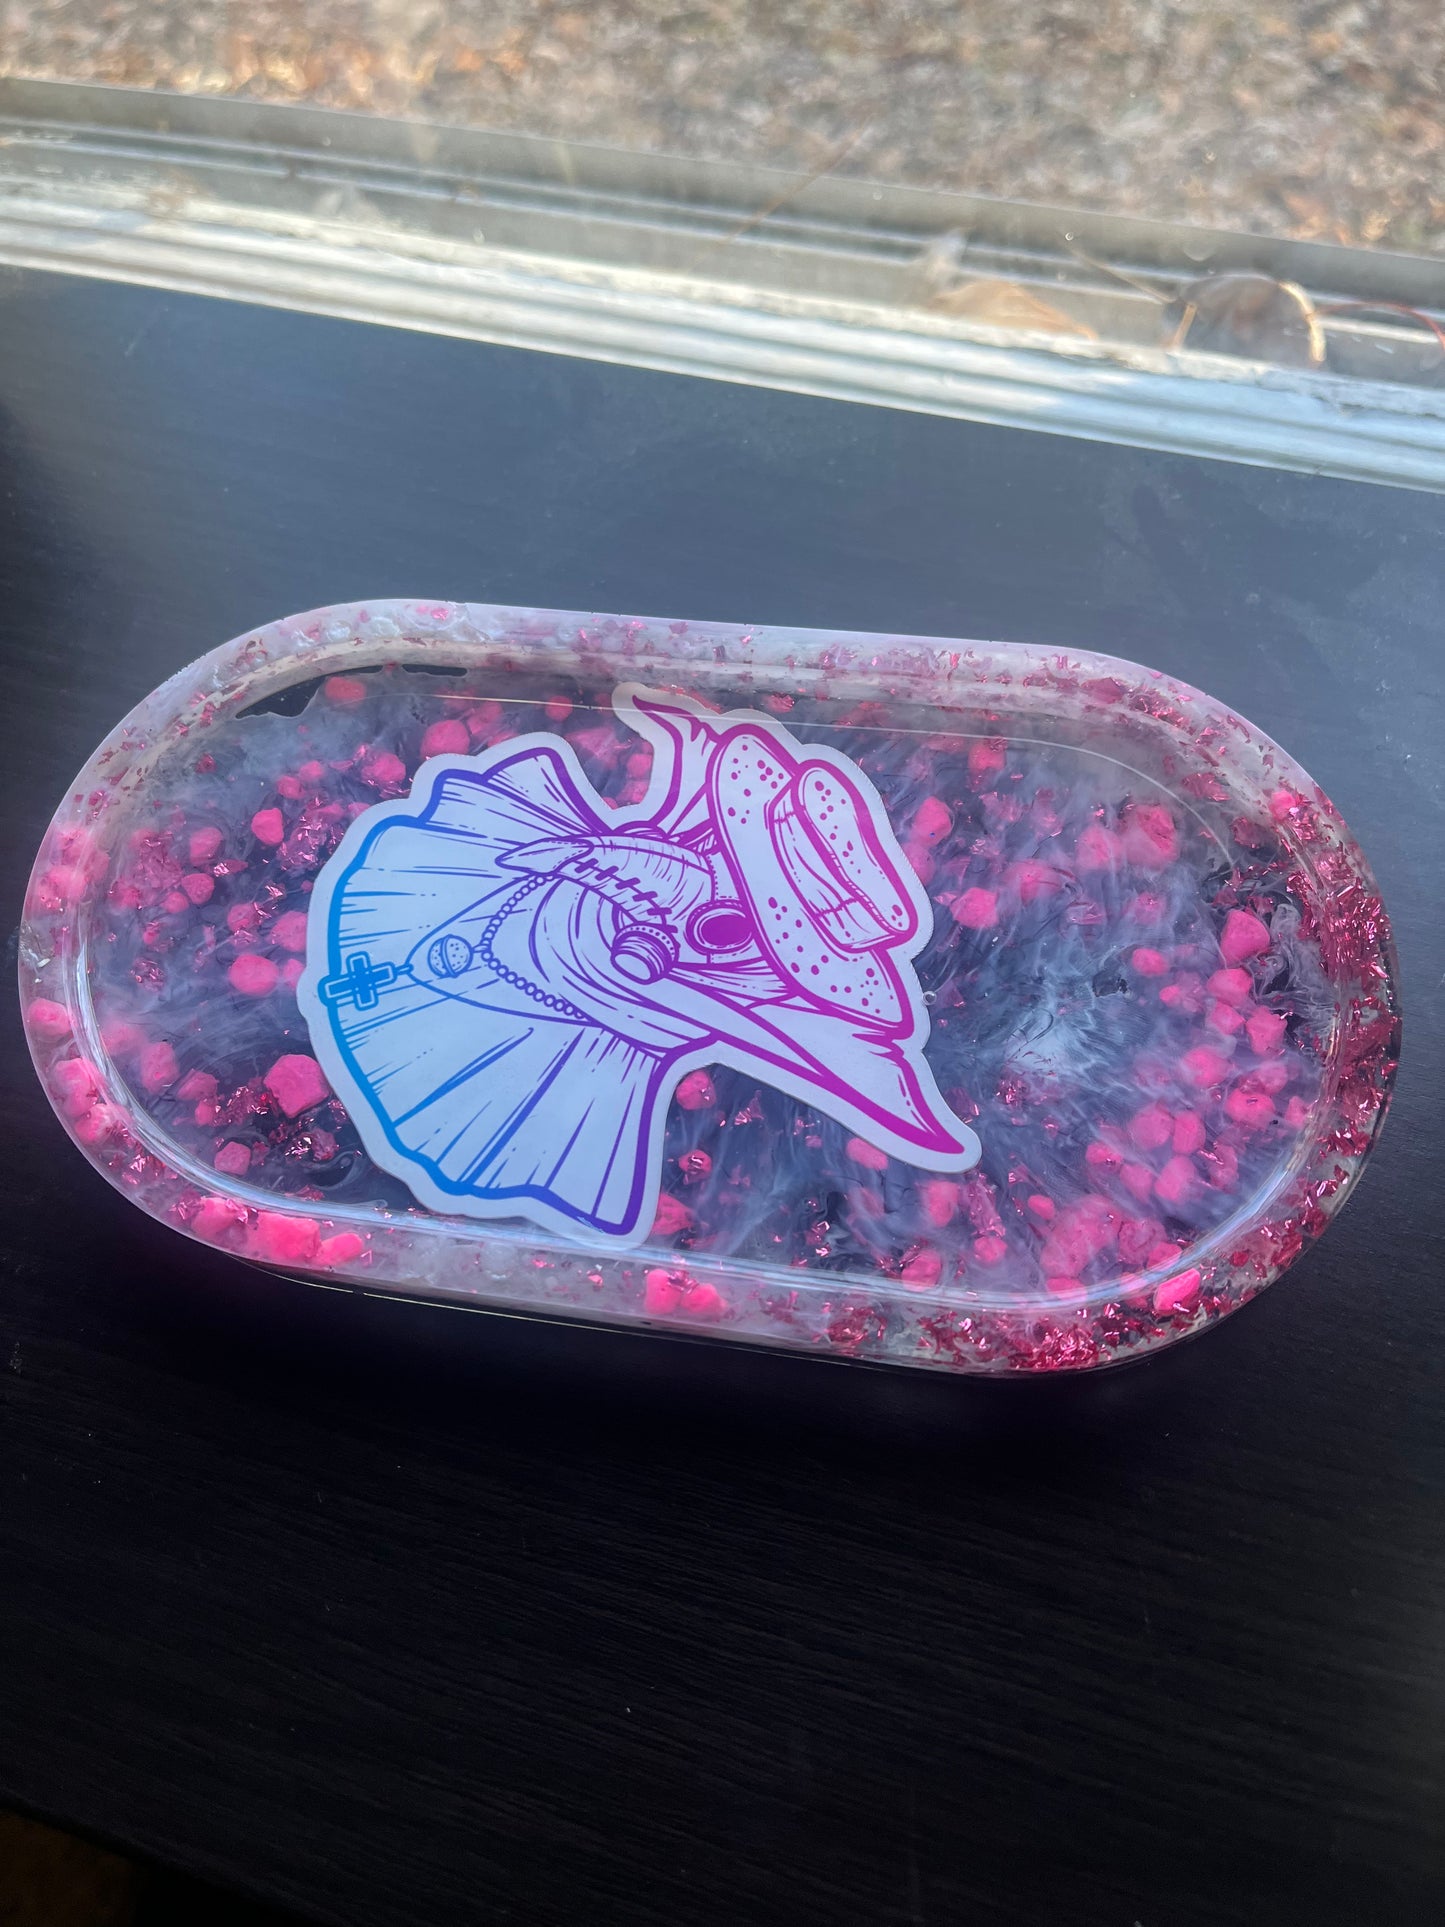 Resin Pink Purple Plague Doctor Medicine Trinket Crystals Jewelry Arts Crafts Money Change Office Supplies Rolling Portable Multi Use Tray